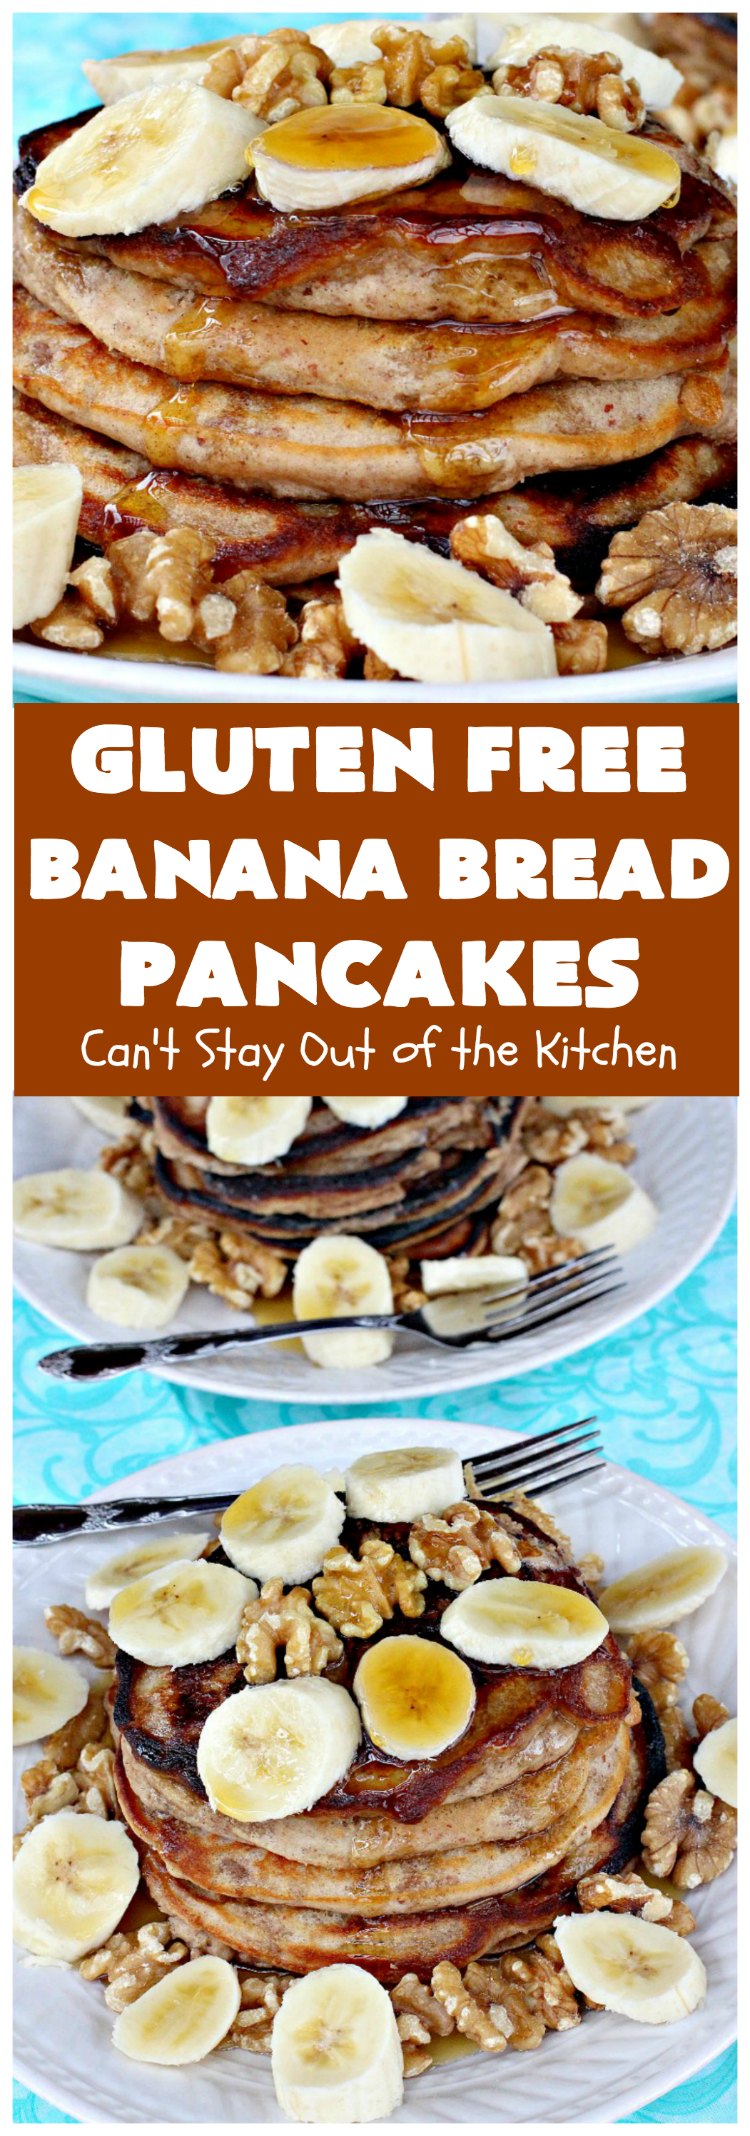 Gluten Free Banana Bread Pancakes | Can't Stay Out of the Kitchen